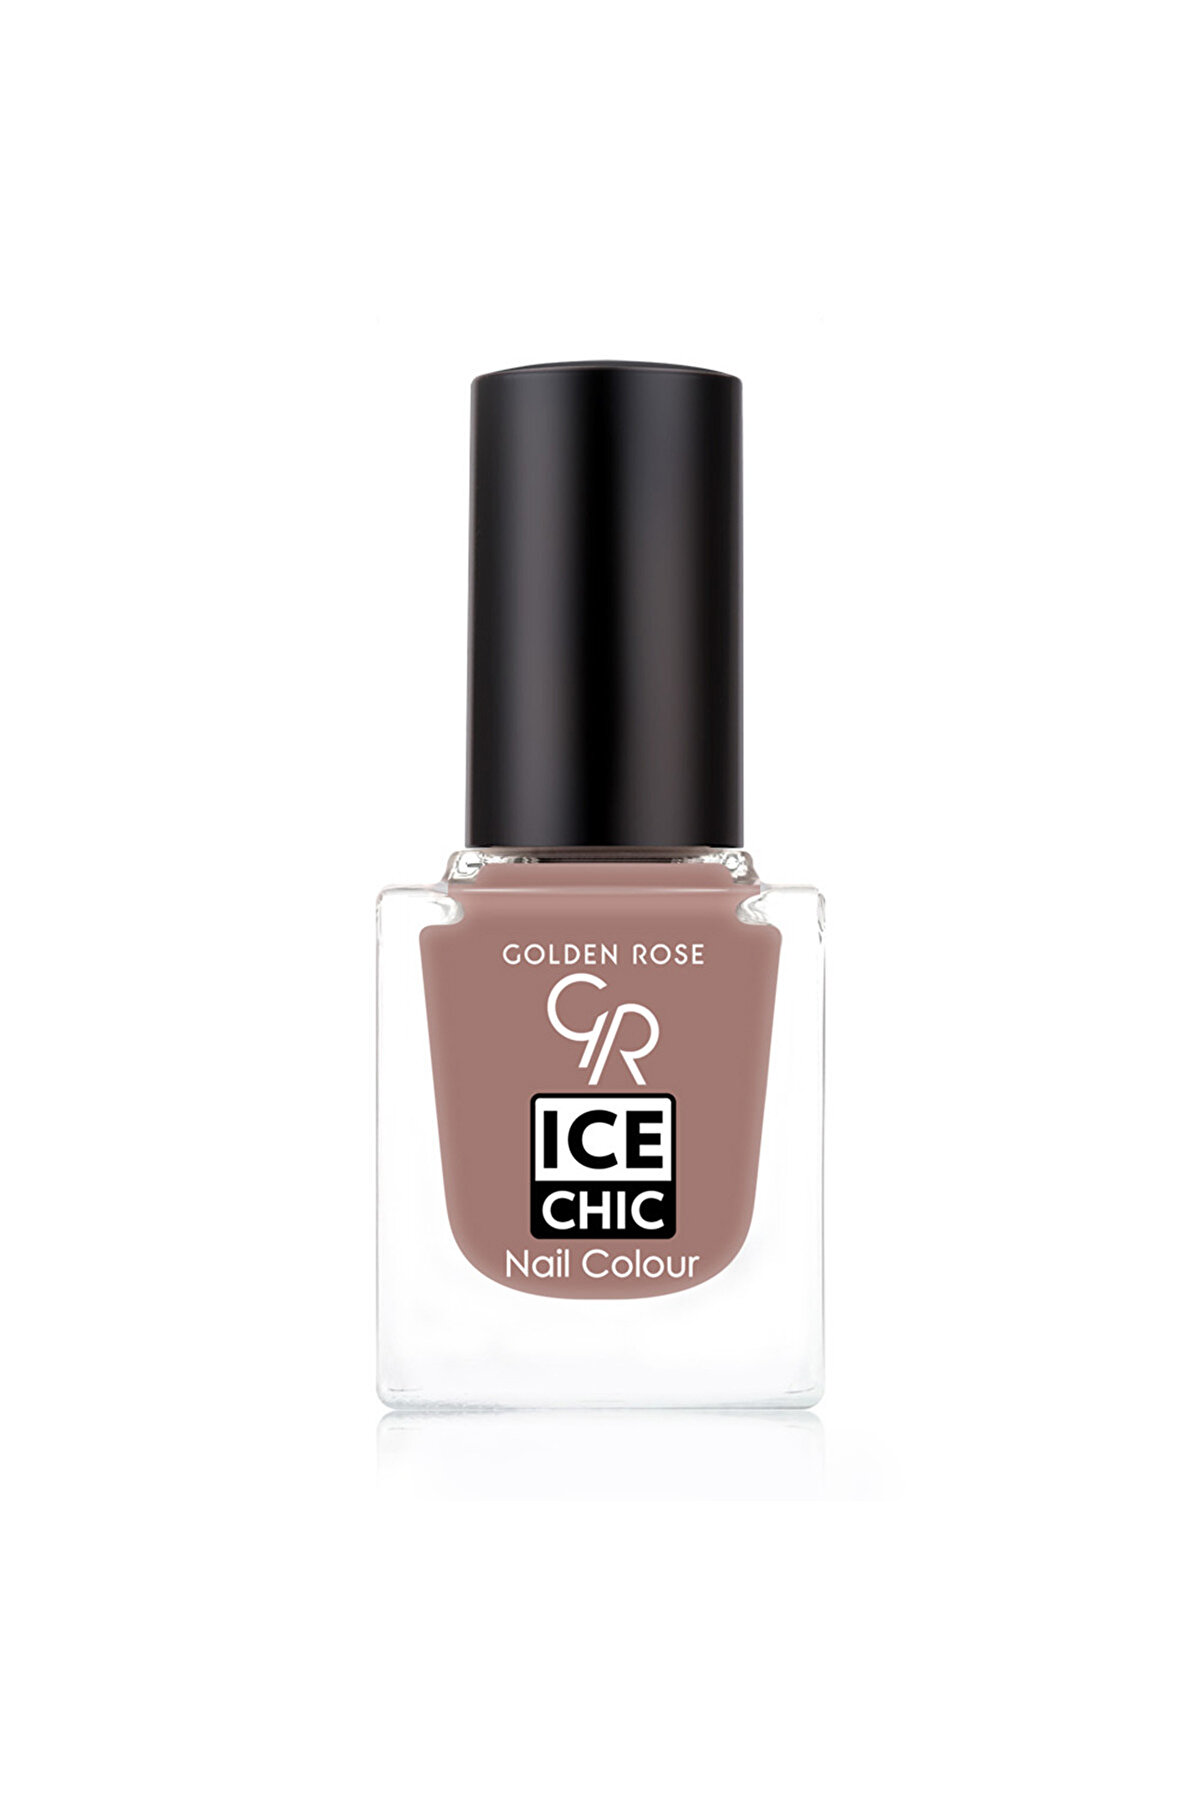 Golden Rose Oje - Ice Chic Nail Colour No: 119 8691190873790